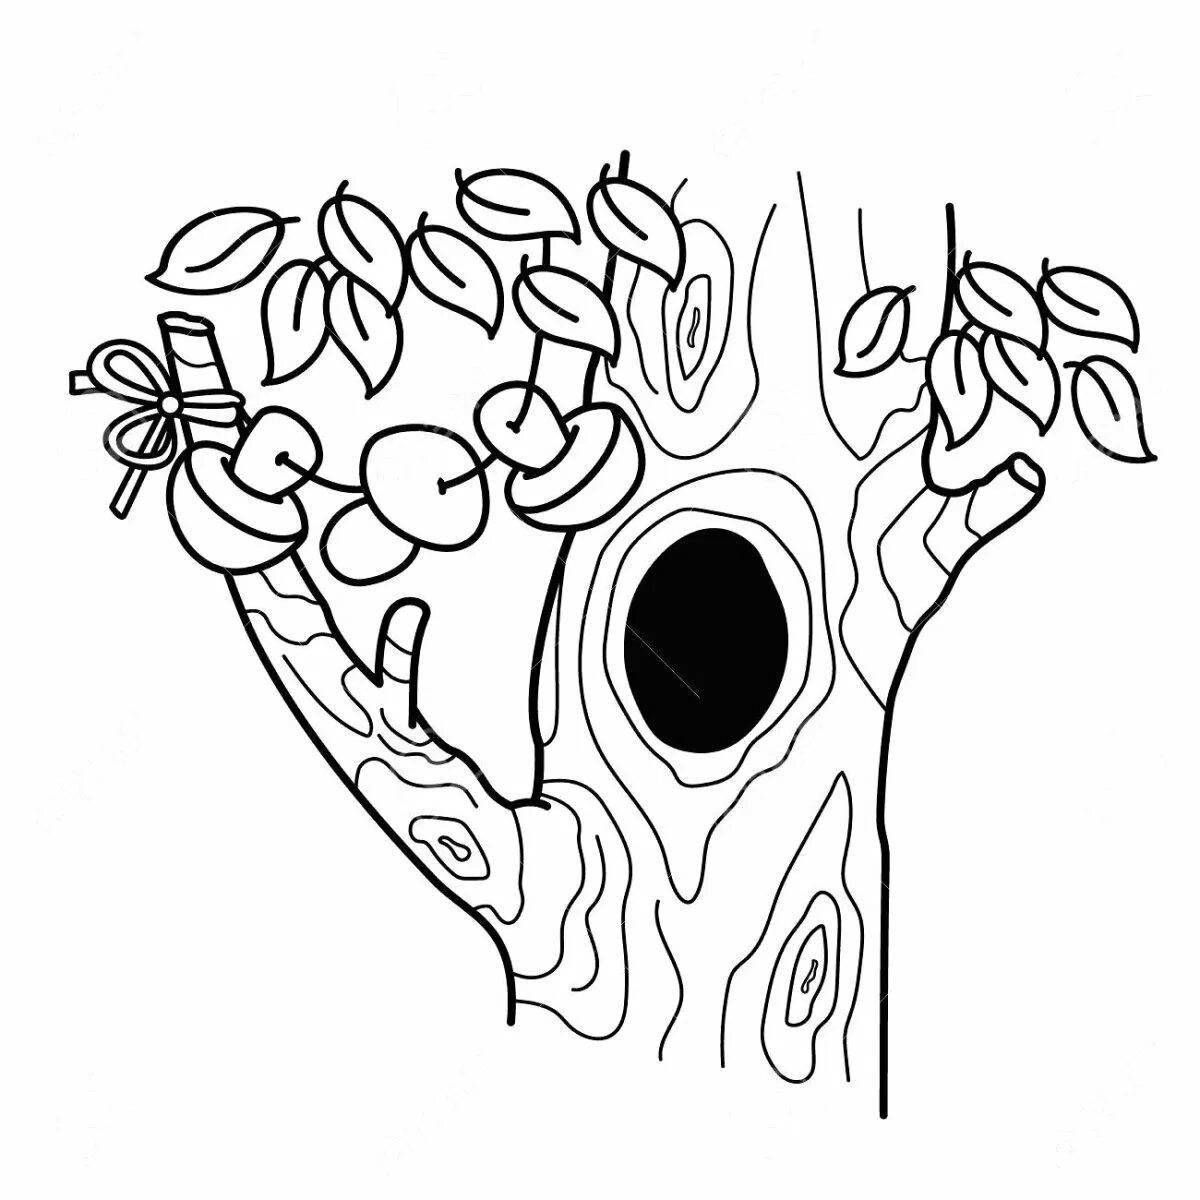 Jovial Hollow Coloring Page